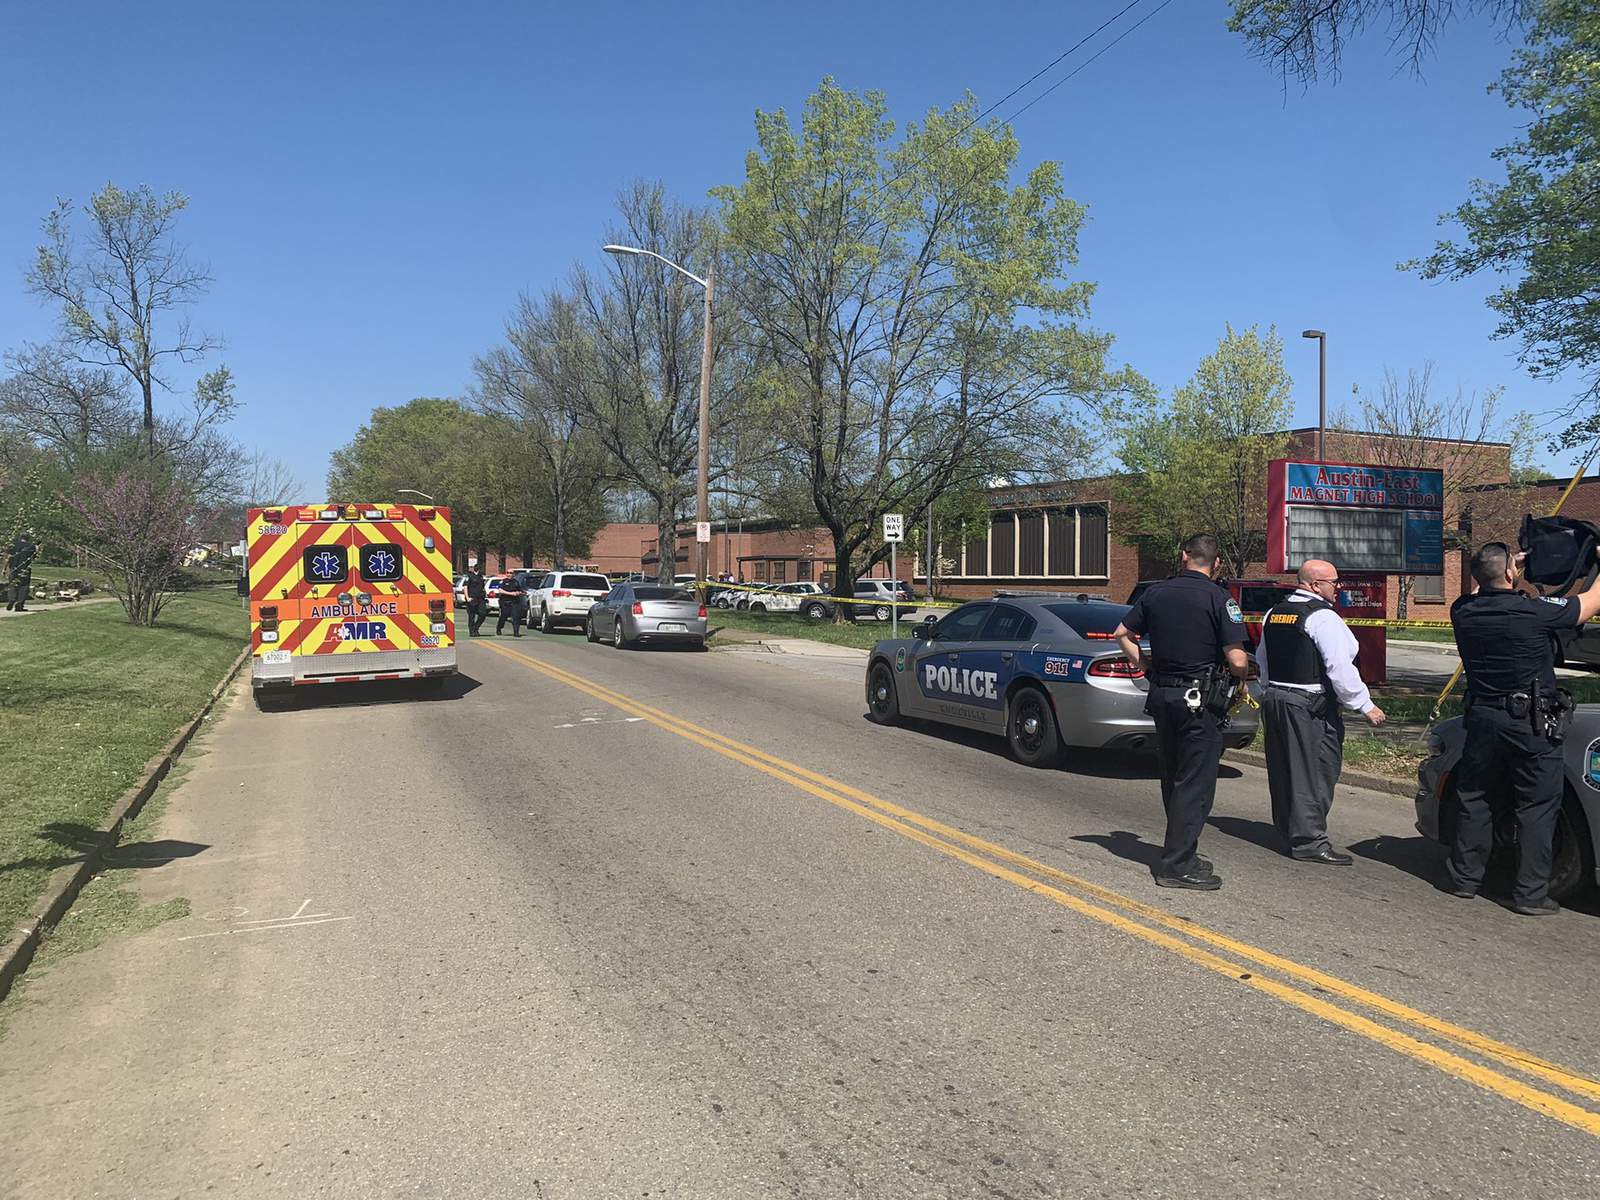 Officer wounded, 1 dead in Tennessee school shooting, police say